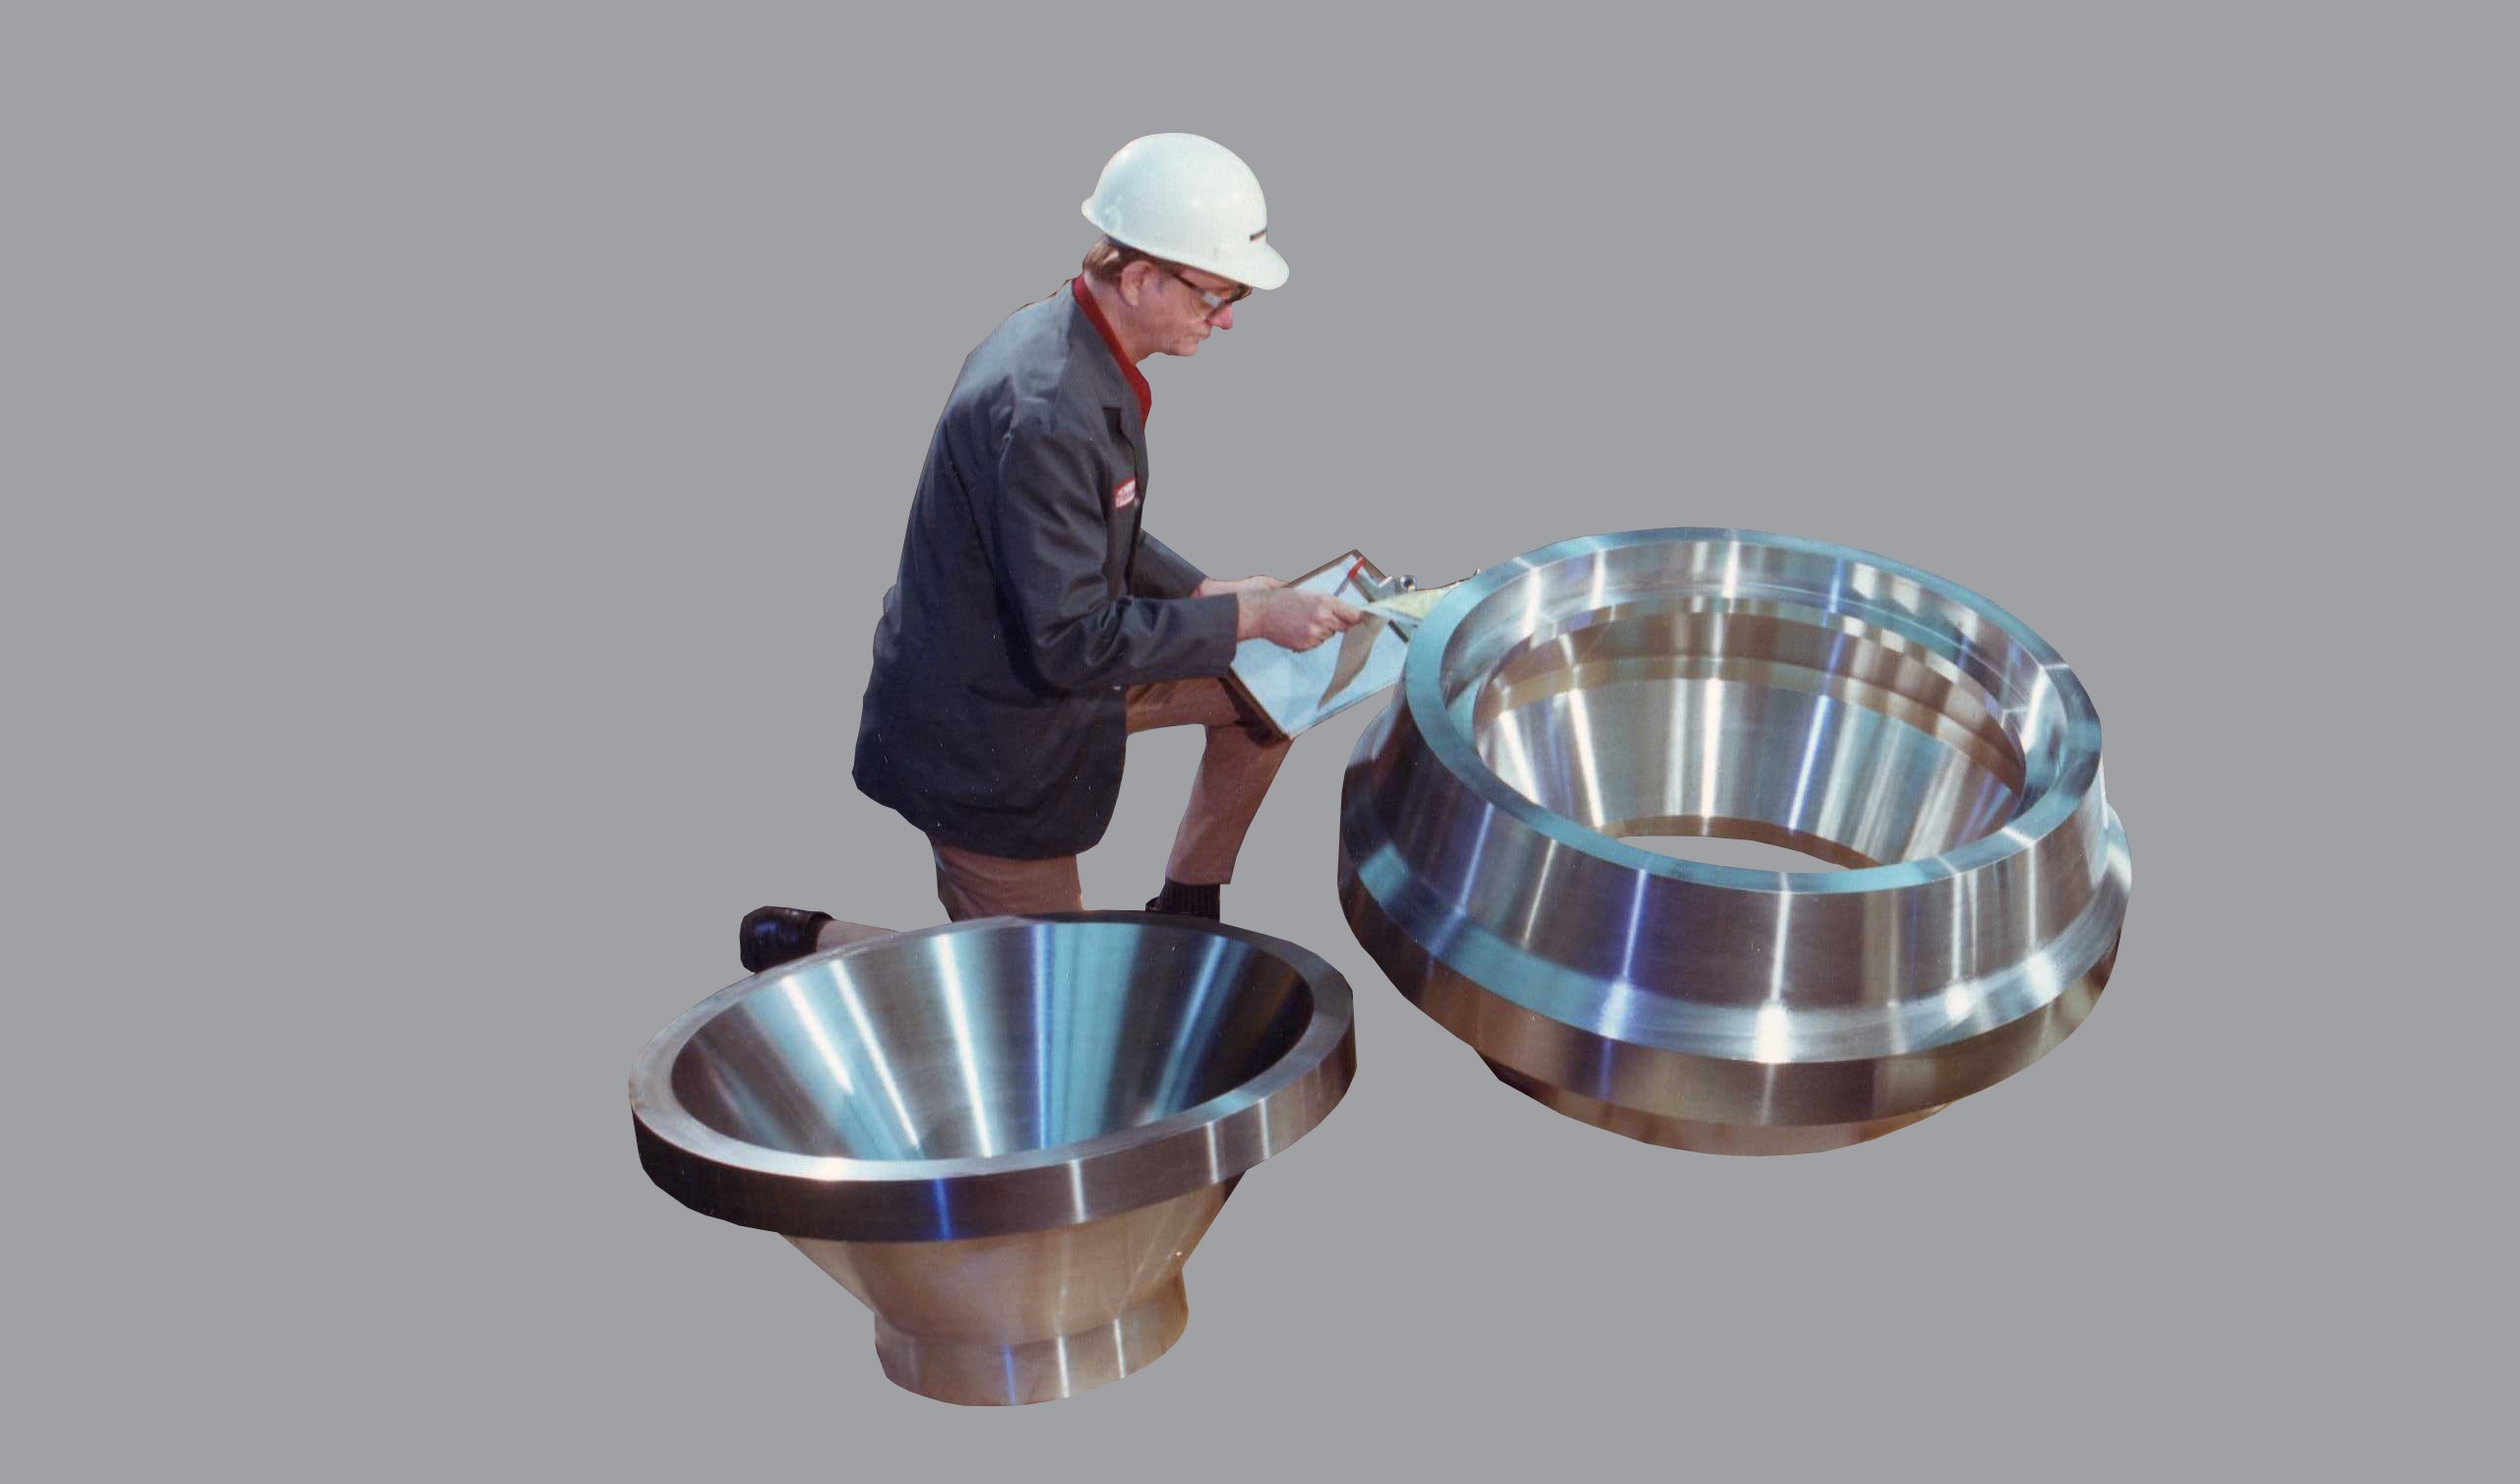 Man inspecting stainless steel product